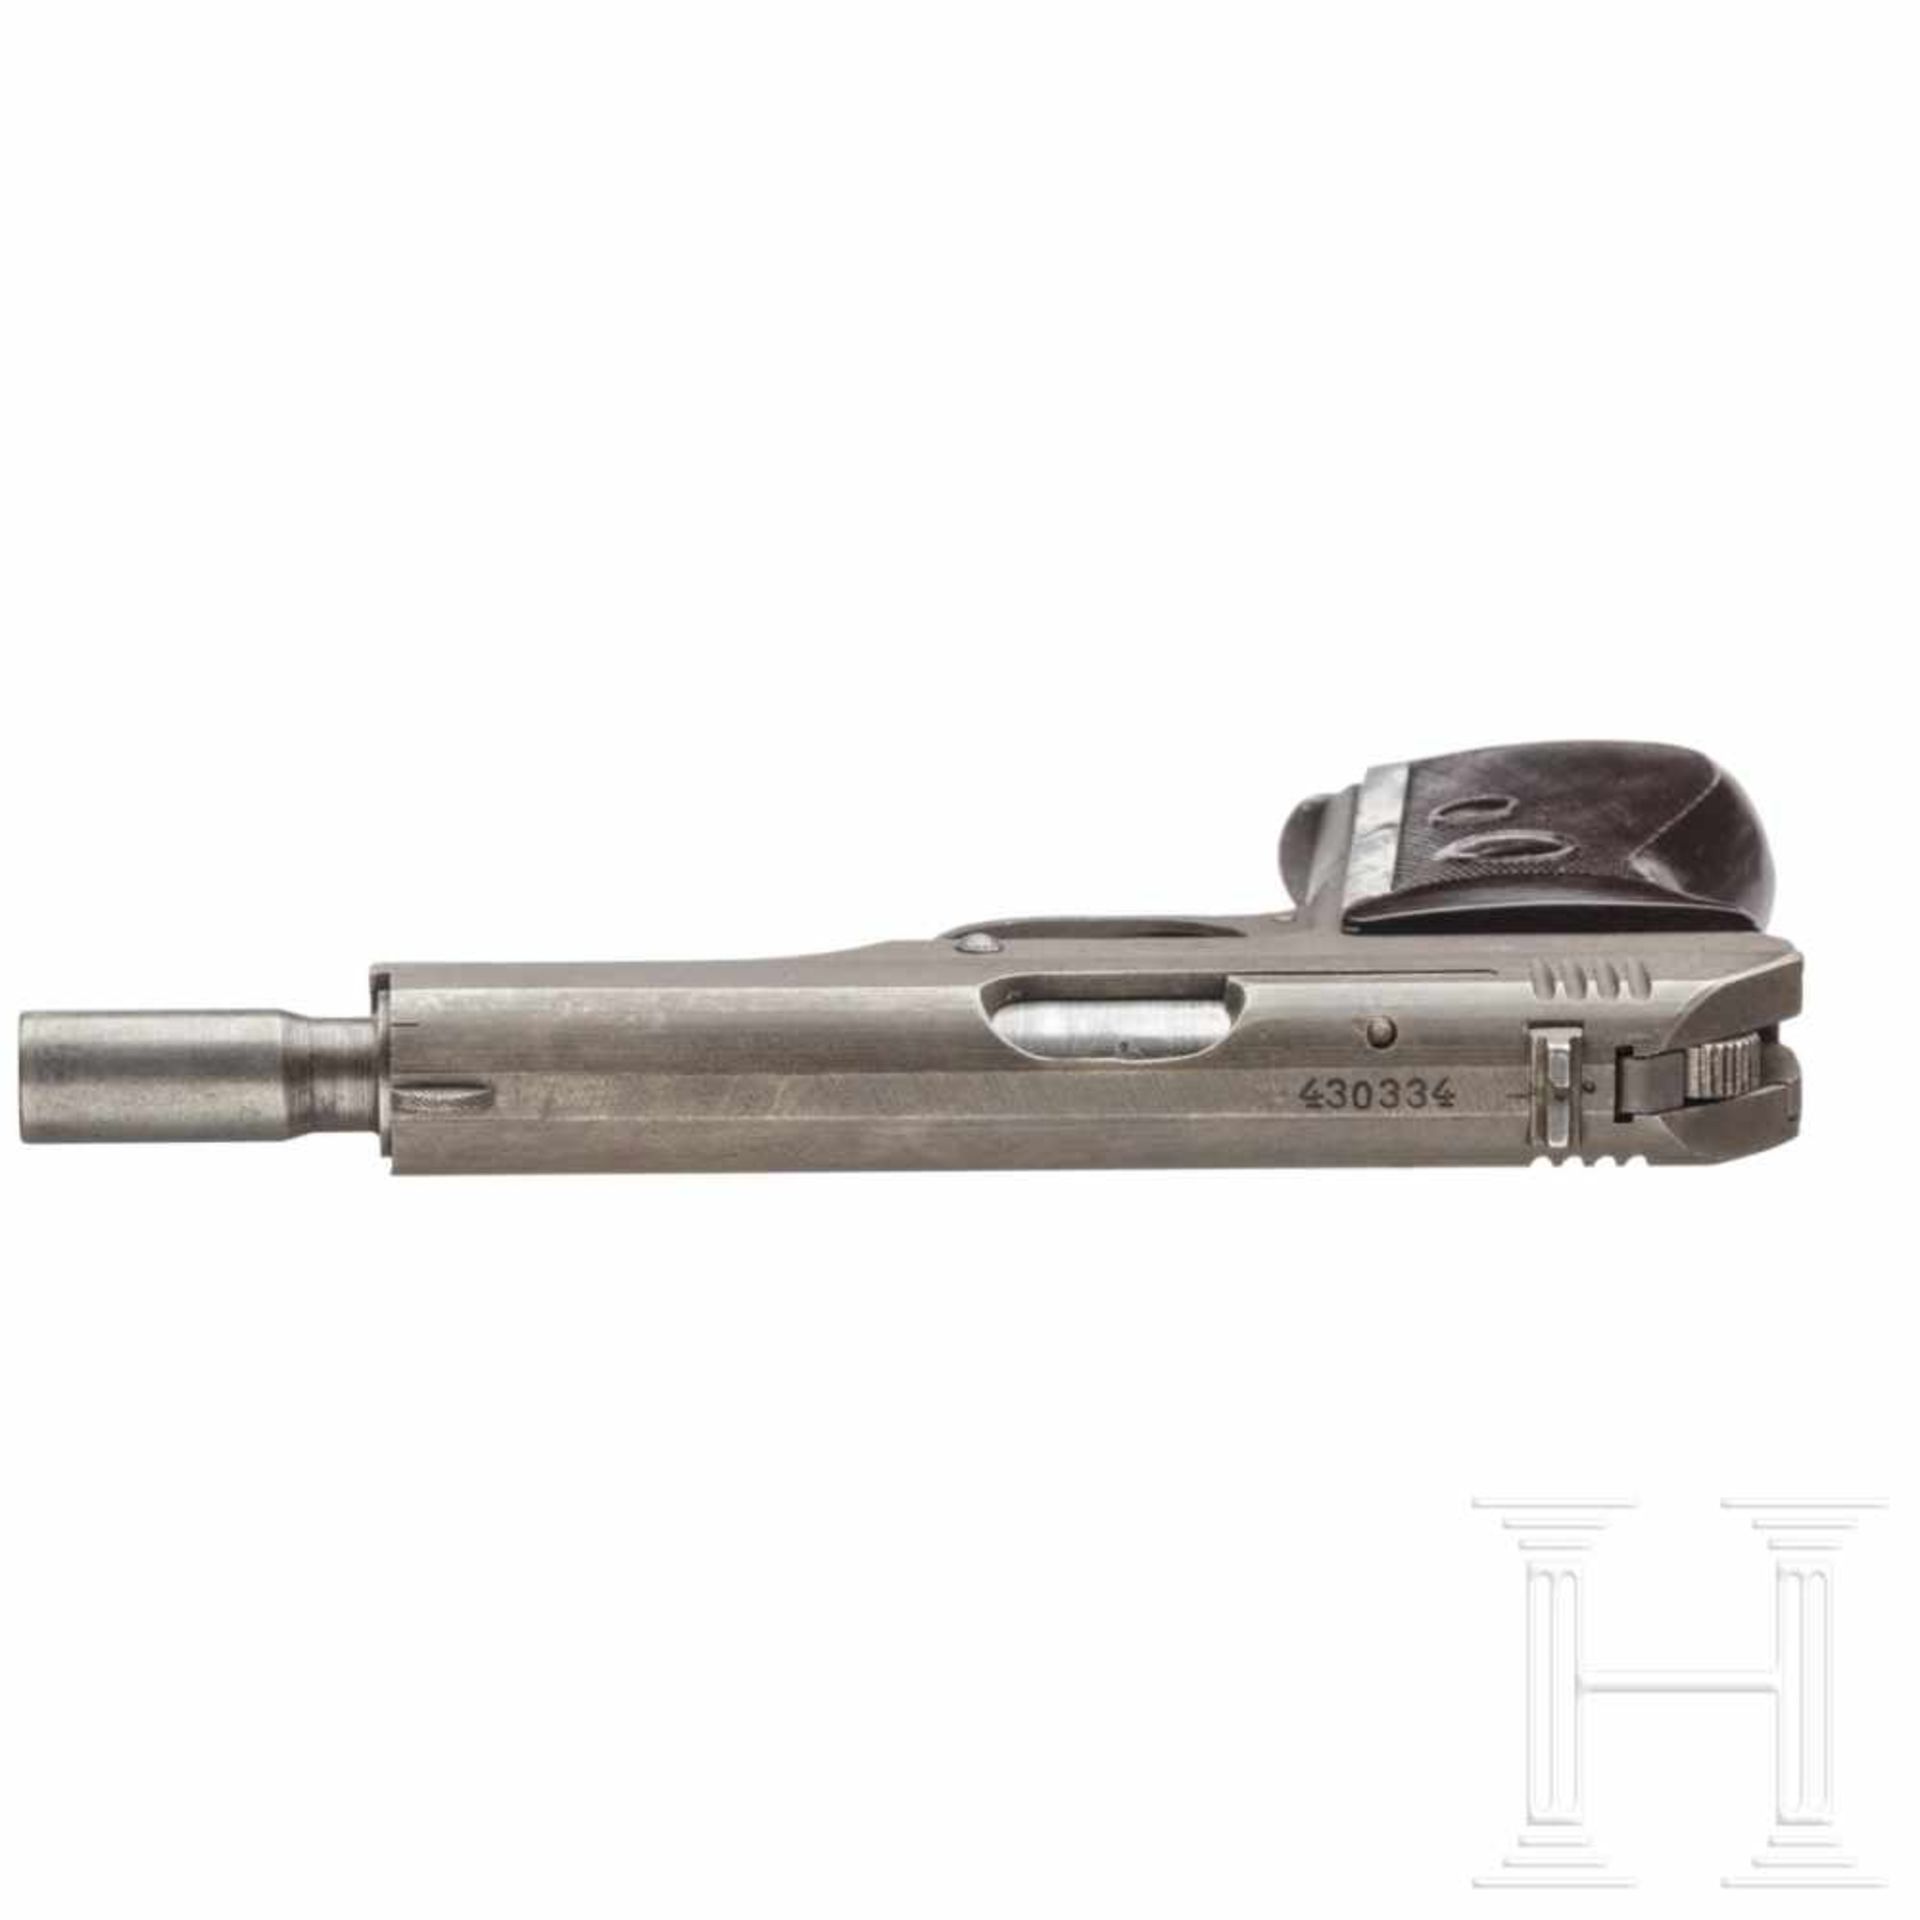 A CZ M 27, code "fnh", barrel with attachment for a silencerKal. 7,65 mm Brown., Nr. 430334, - Bild 3 aus 5